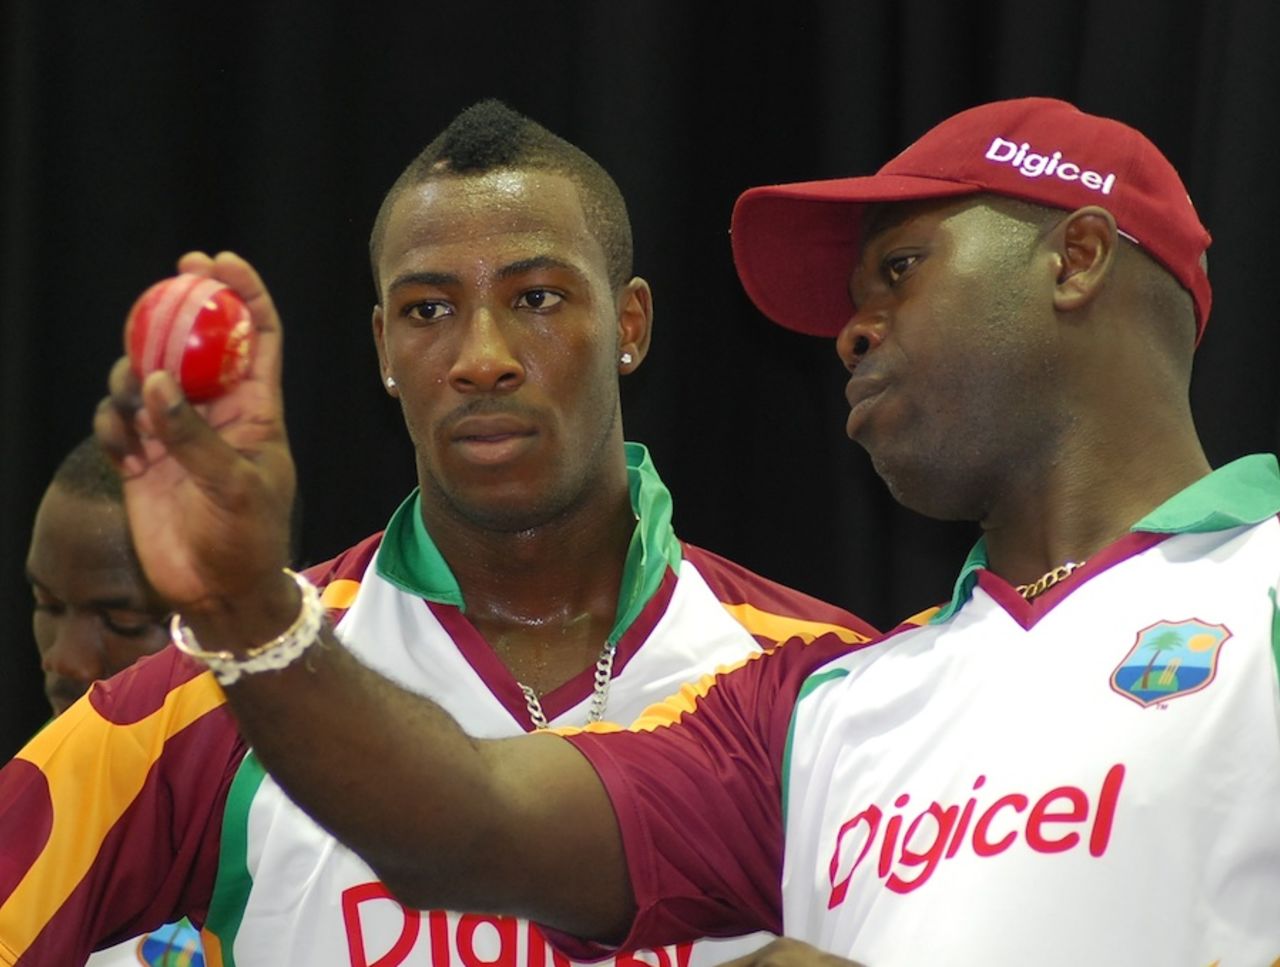 Ottis Gibson passes on tips to Andre Russell, Barbados, October 31, 2010